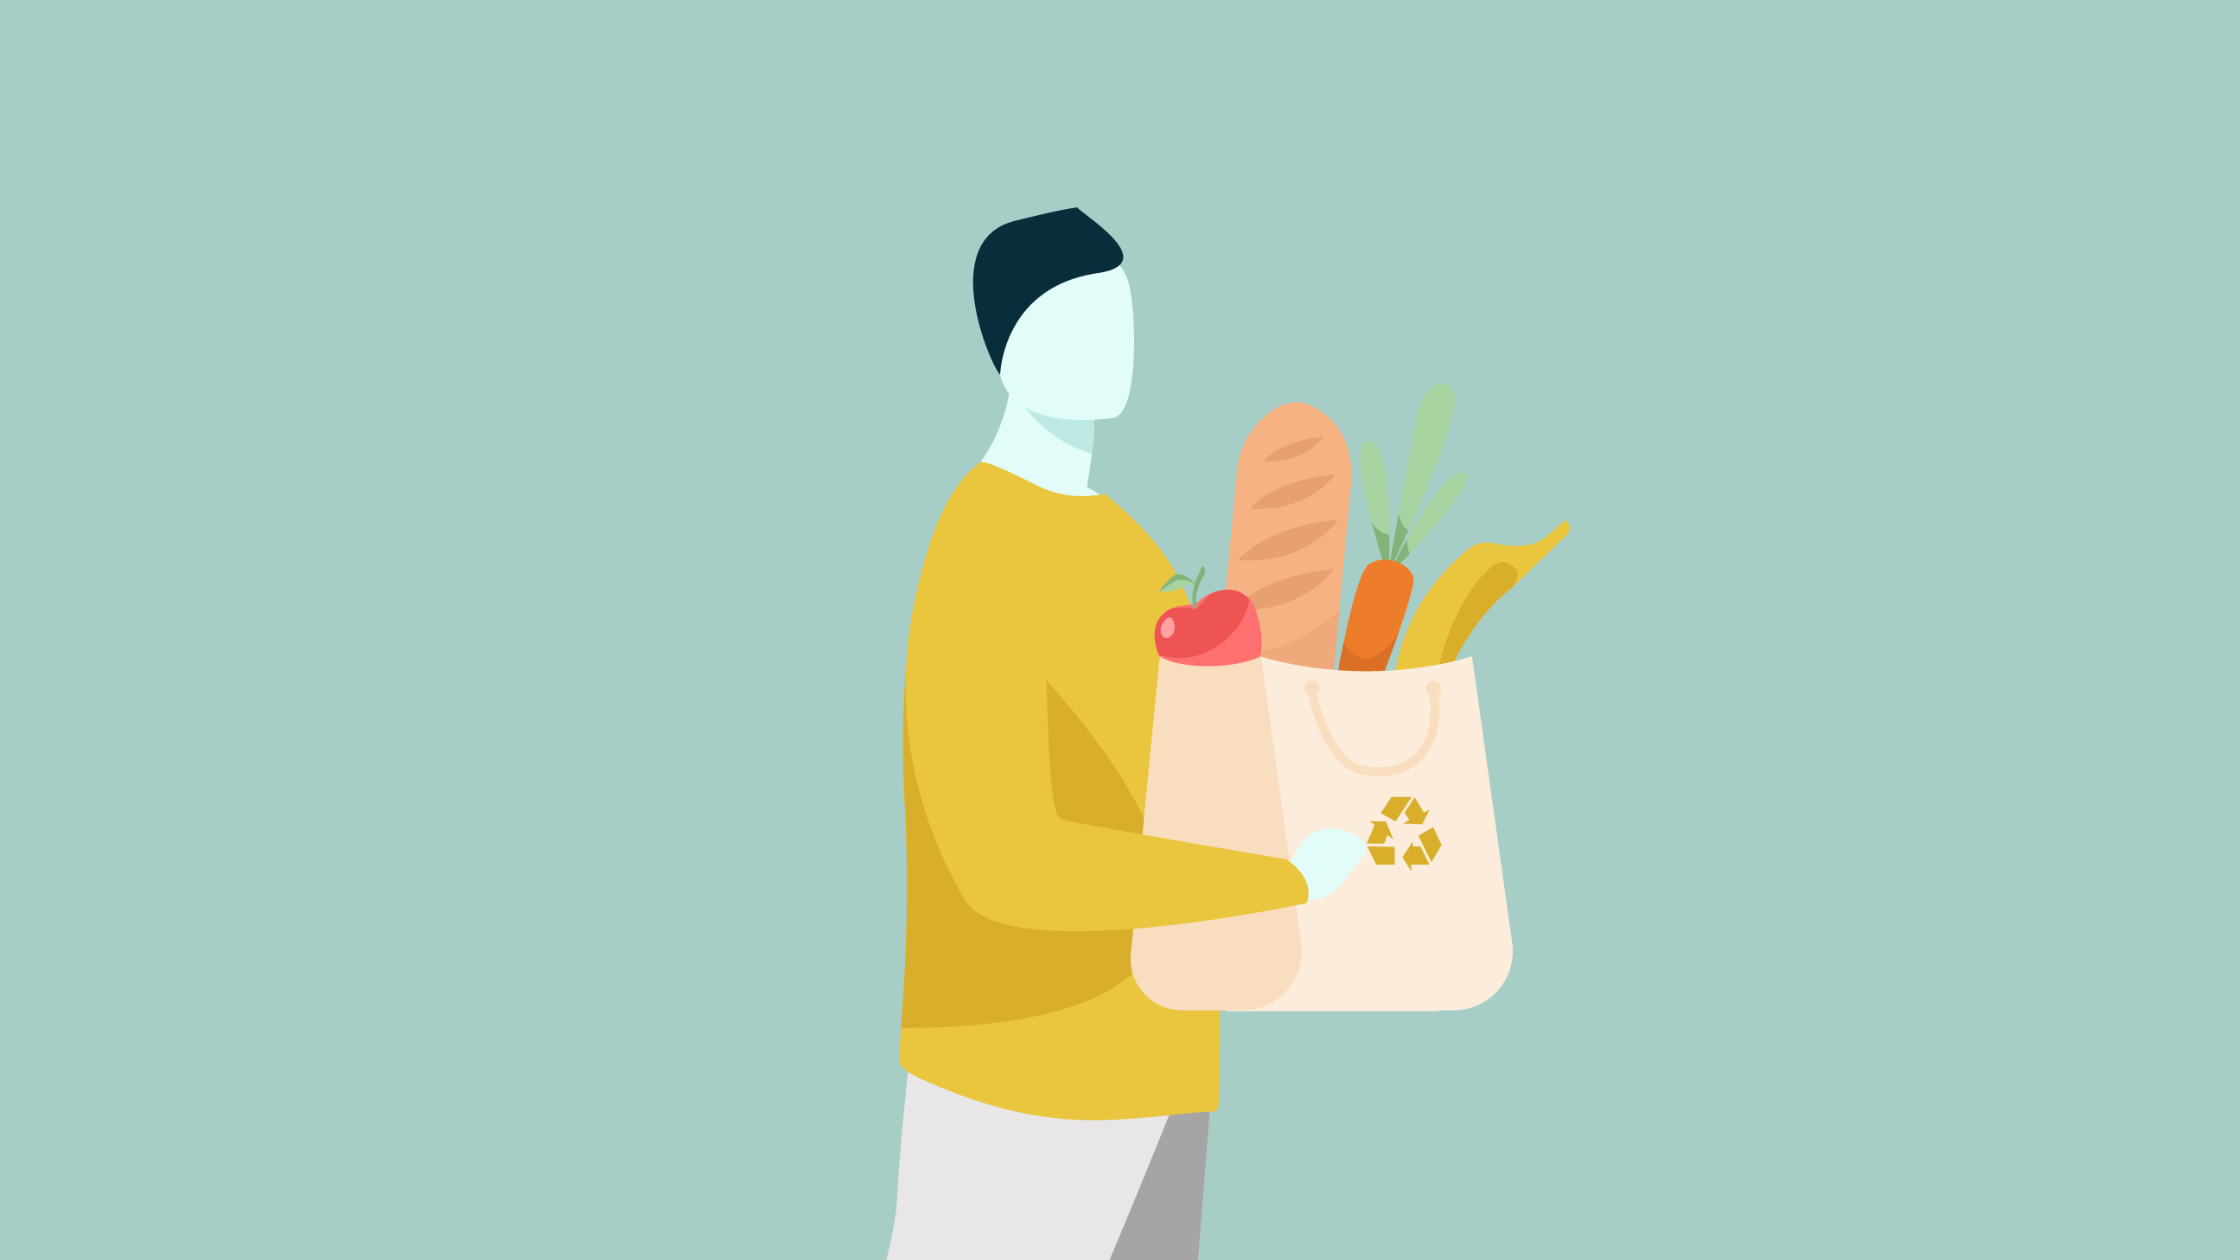 Financial wellbeing program for grocery employees